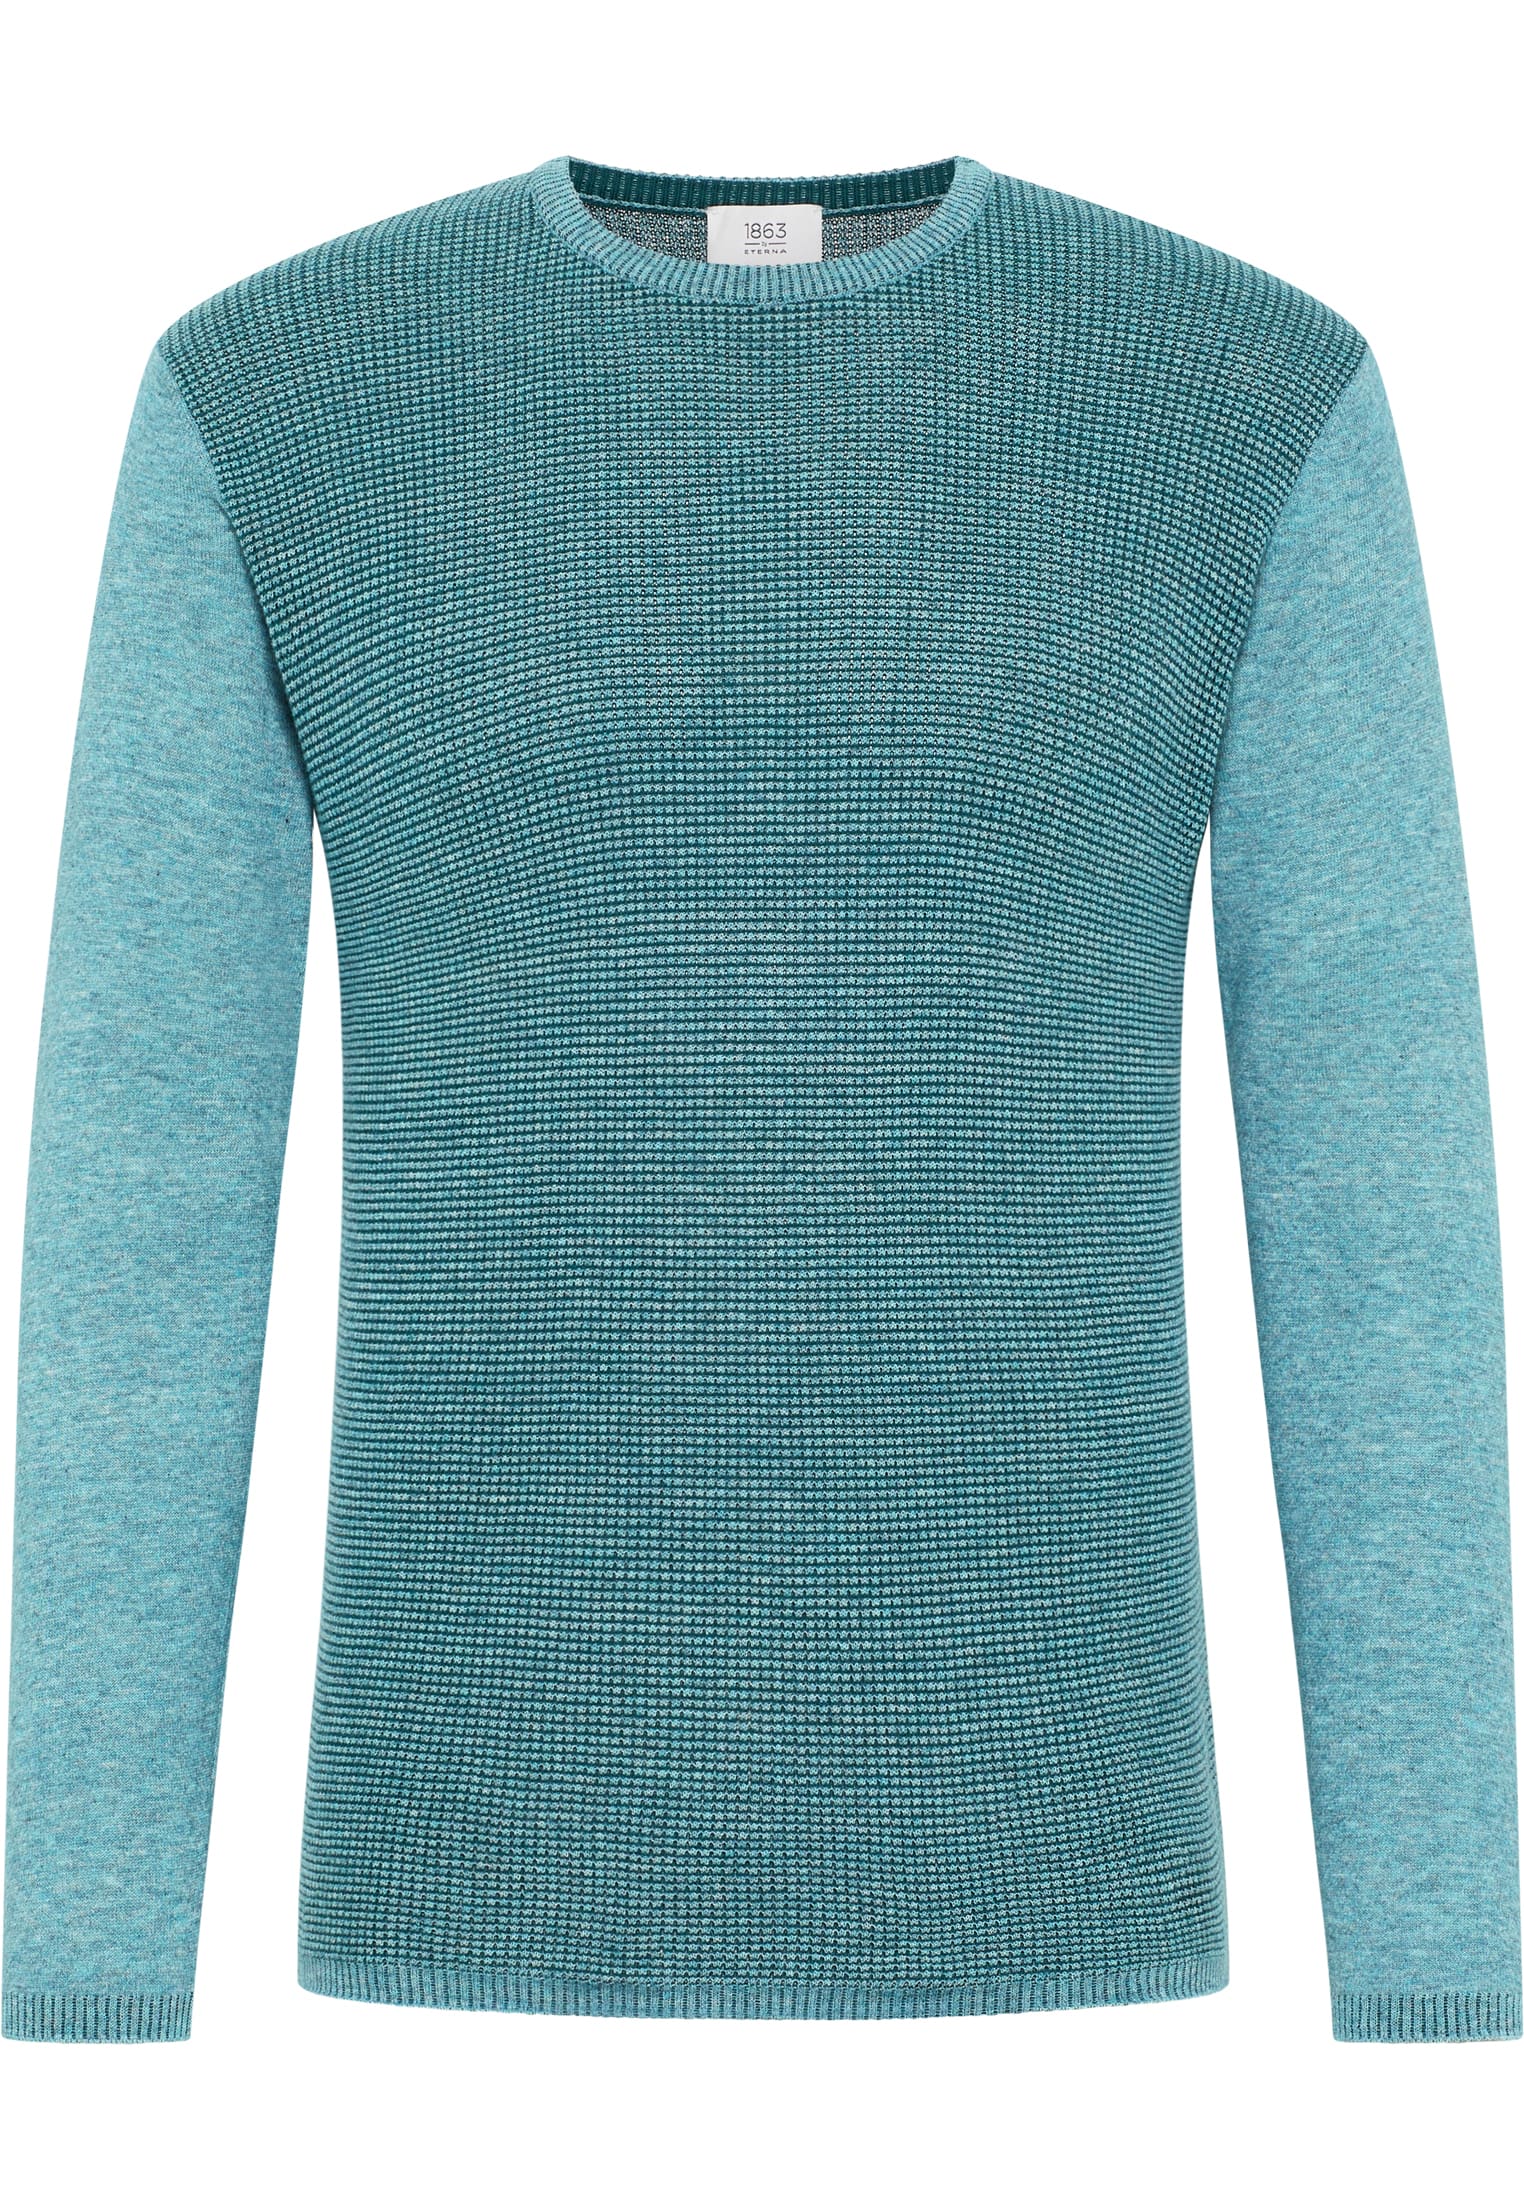 Knitted jumper in petrol structured